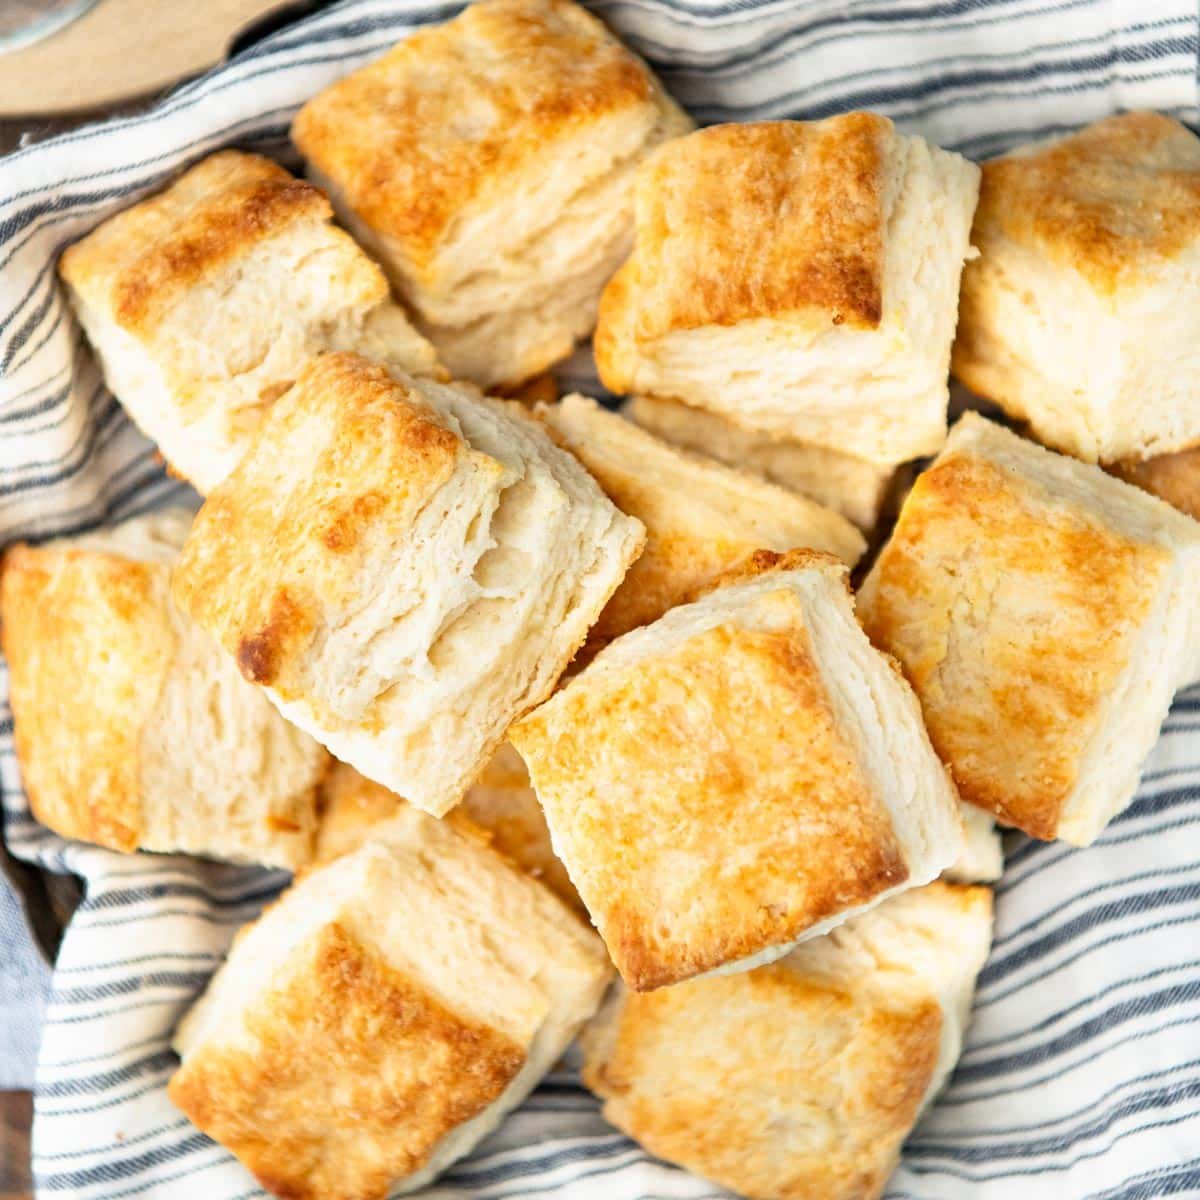 Overhead shot of a basket of flaky biscuits with layers.